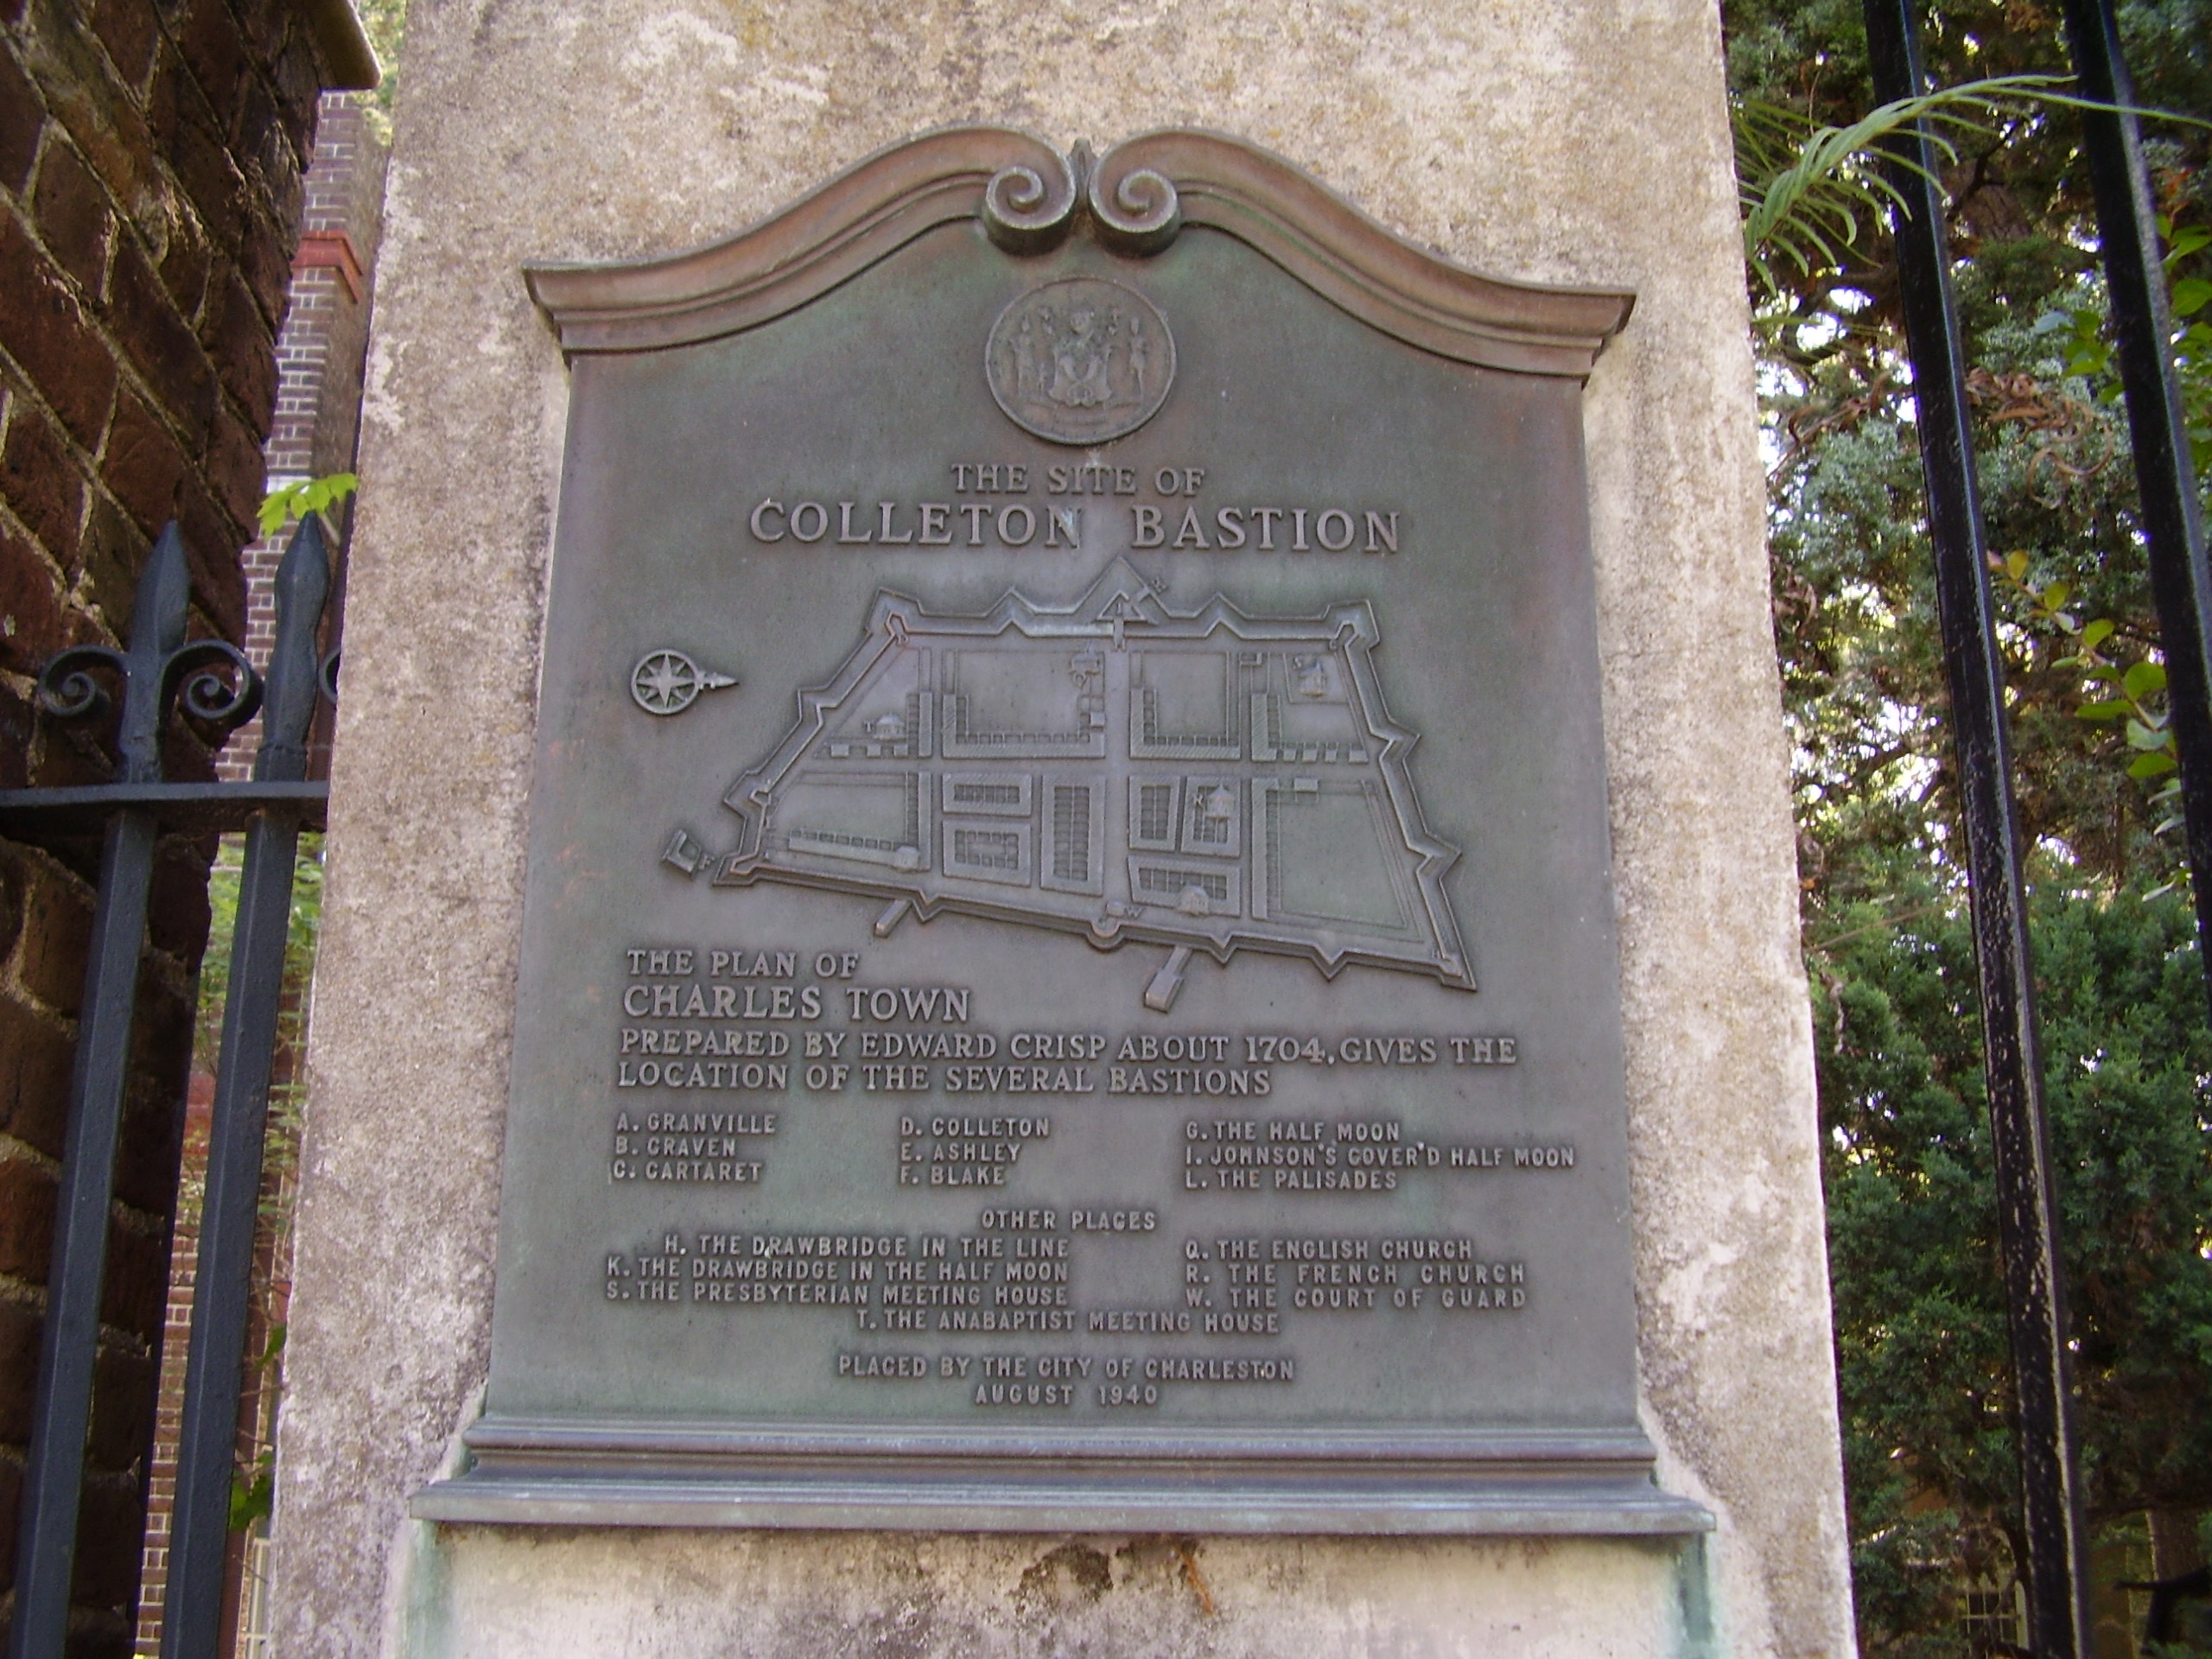 The Site of Colleton Bastion Marker